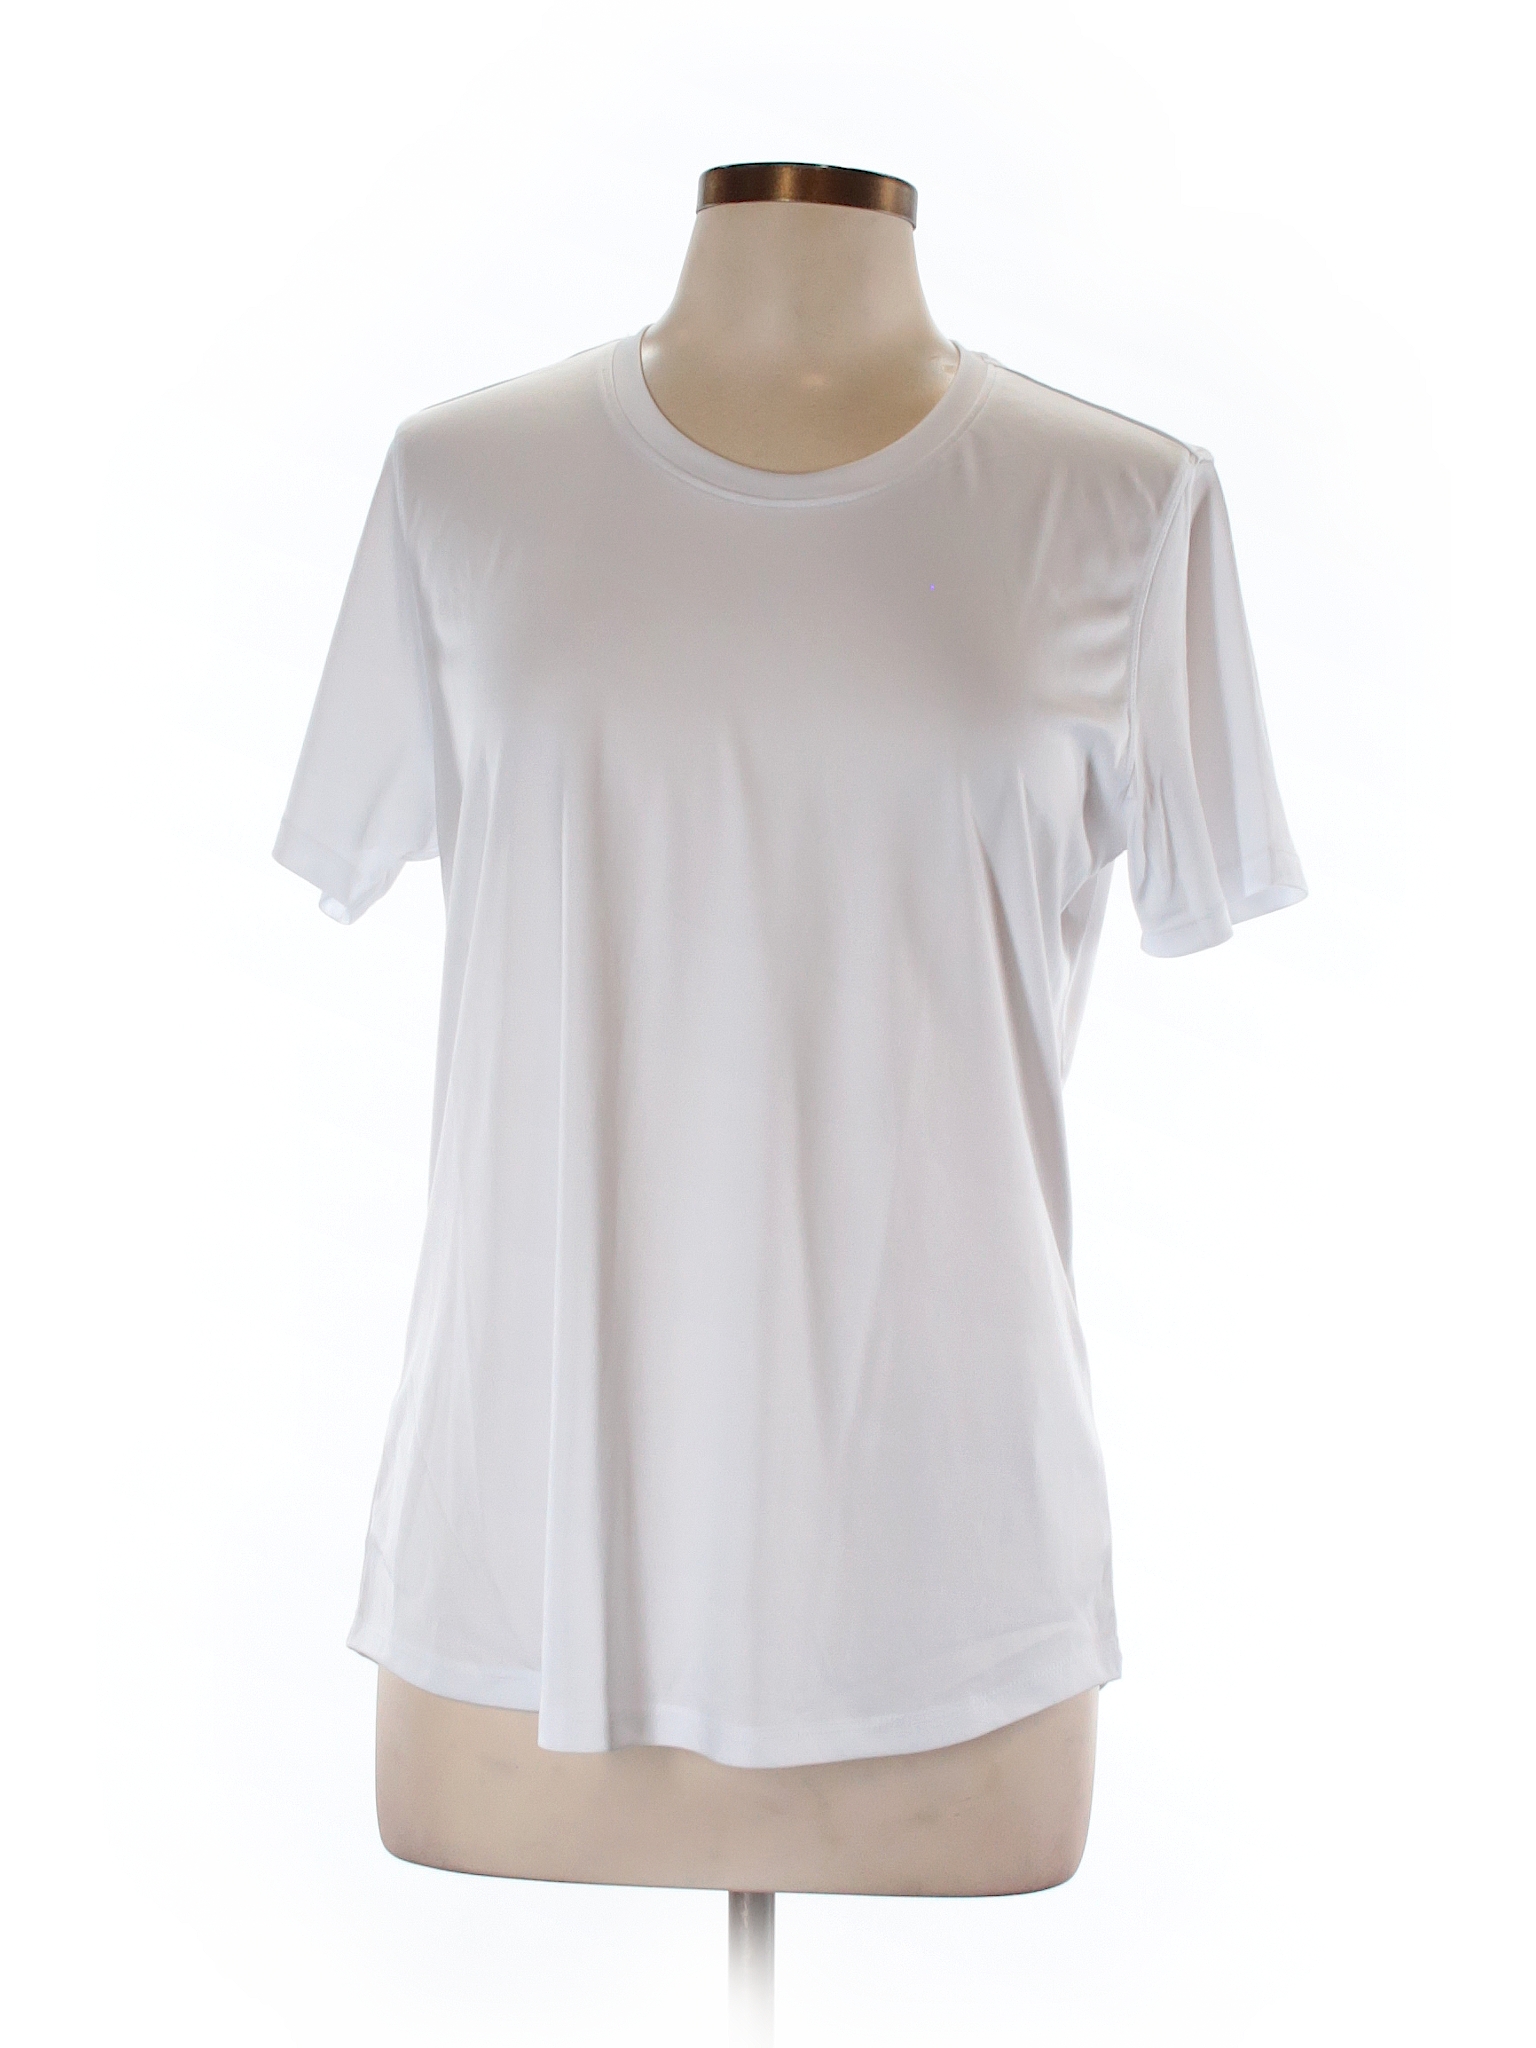 Unbranded 100% Polyester Solid White Active T-Shirt Size L - 69% off ...